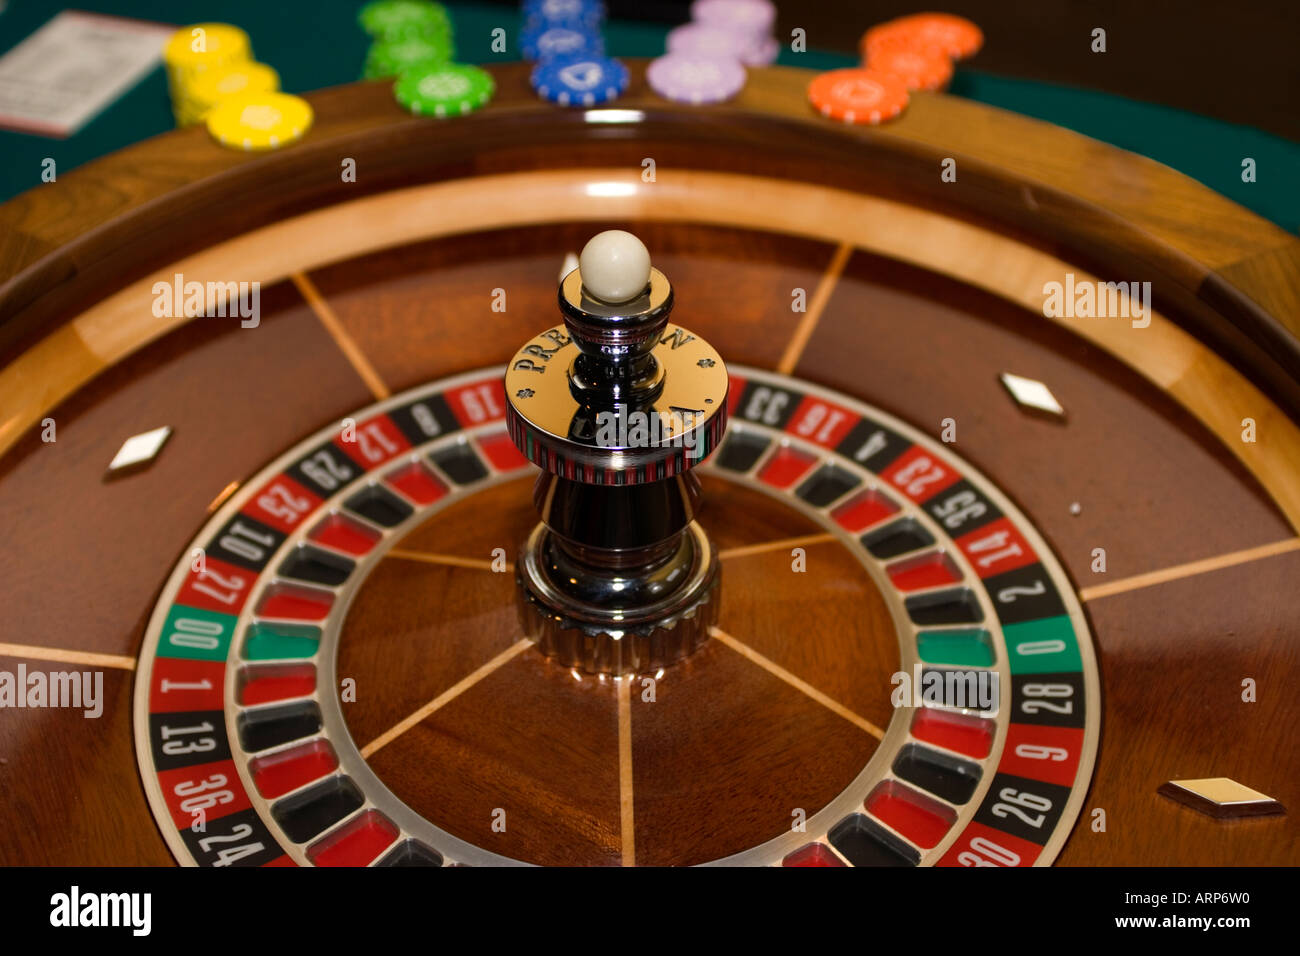 Roulette Wheel with chips Stock Photo